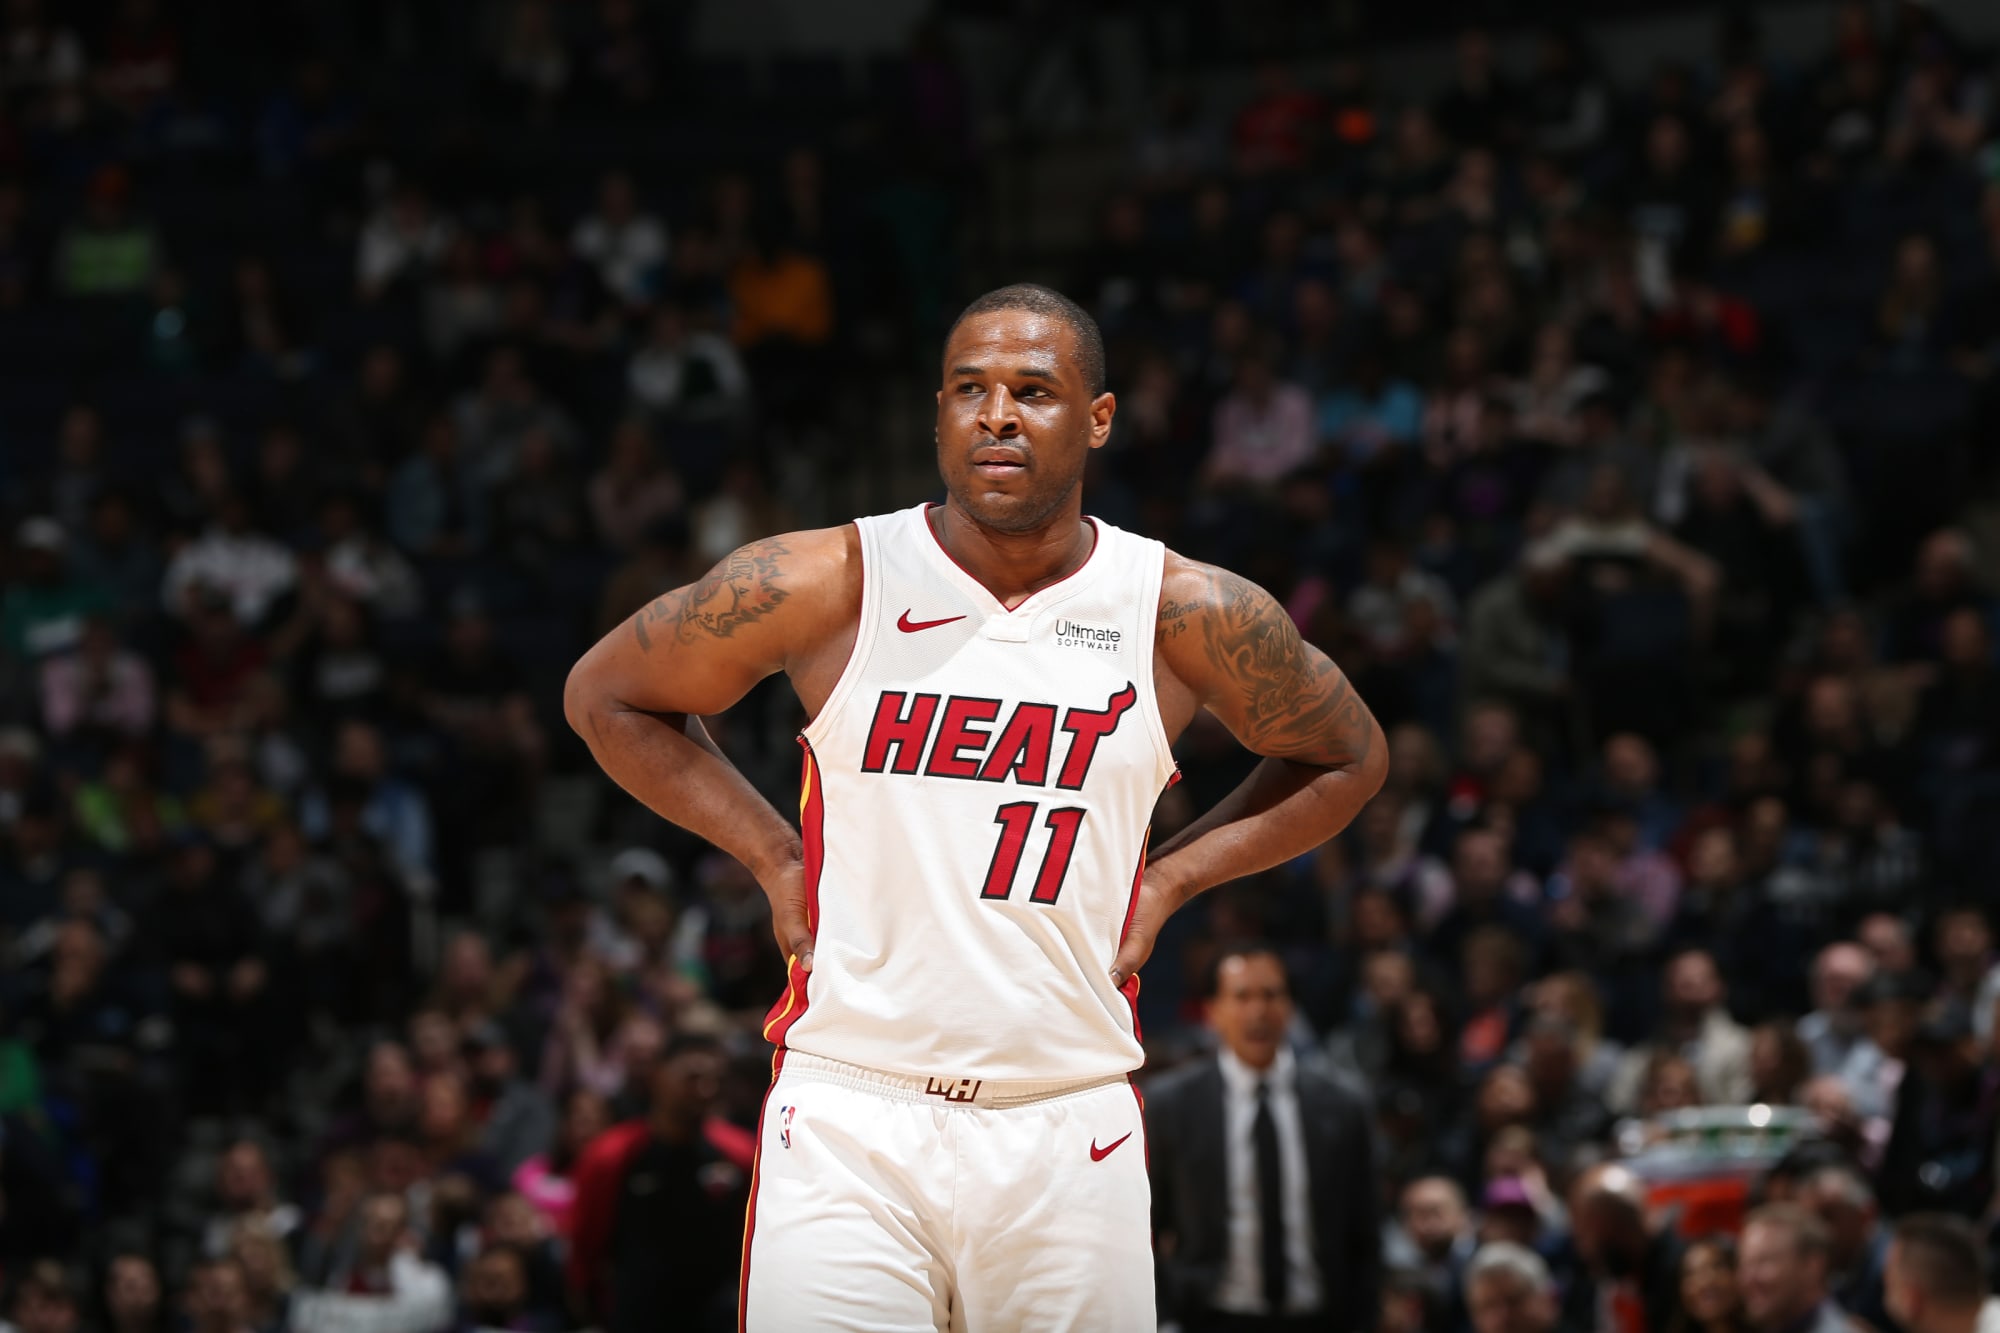 Miami Heat: 3 goals for Dion Waiters in the 2019-20 season